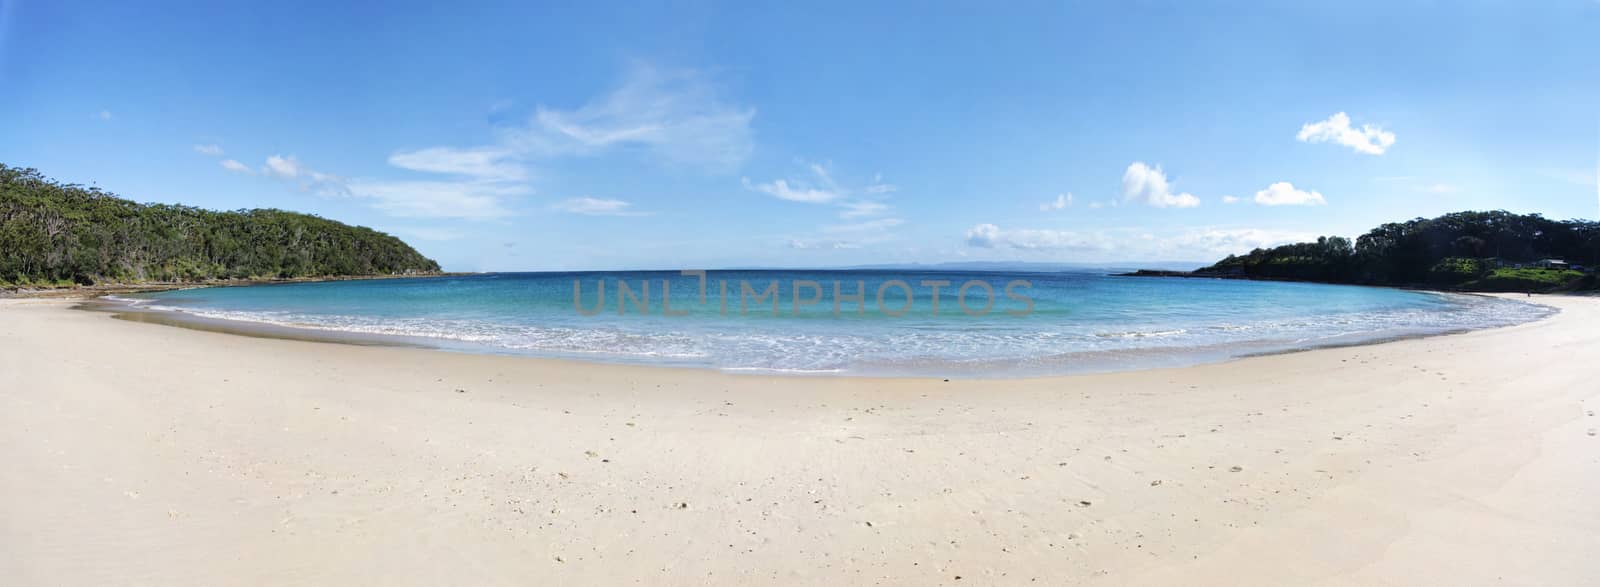 Summercloud Bay panorama on a beautiful sunny day. It is a semicircular, 500 m wide southwest facing bay   When conditions are right, it is a popular surf beach with breaks of 4m at the left side and is also known as Aussie Pipe or Pipeline. Australia